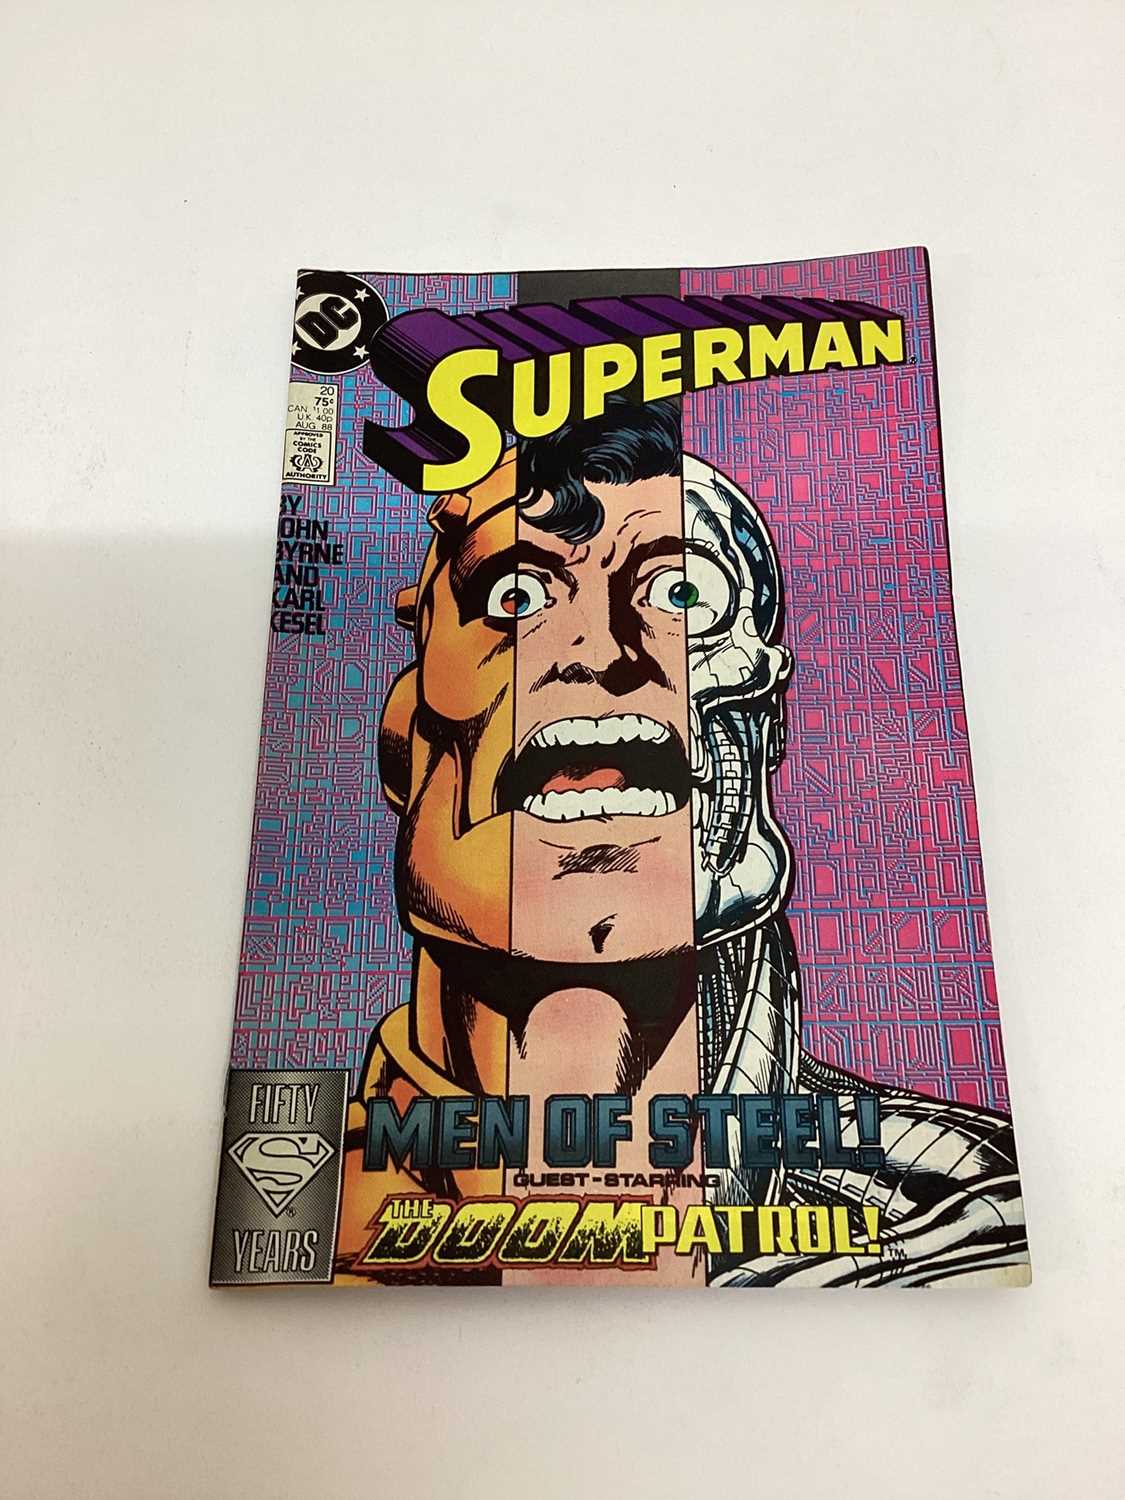 Large quantity of 1980's and 90's DC Comics, Superman to include #1, #4 1st appearance of Bloodsport - Image 8 of 11